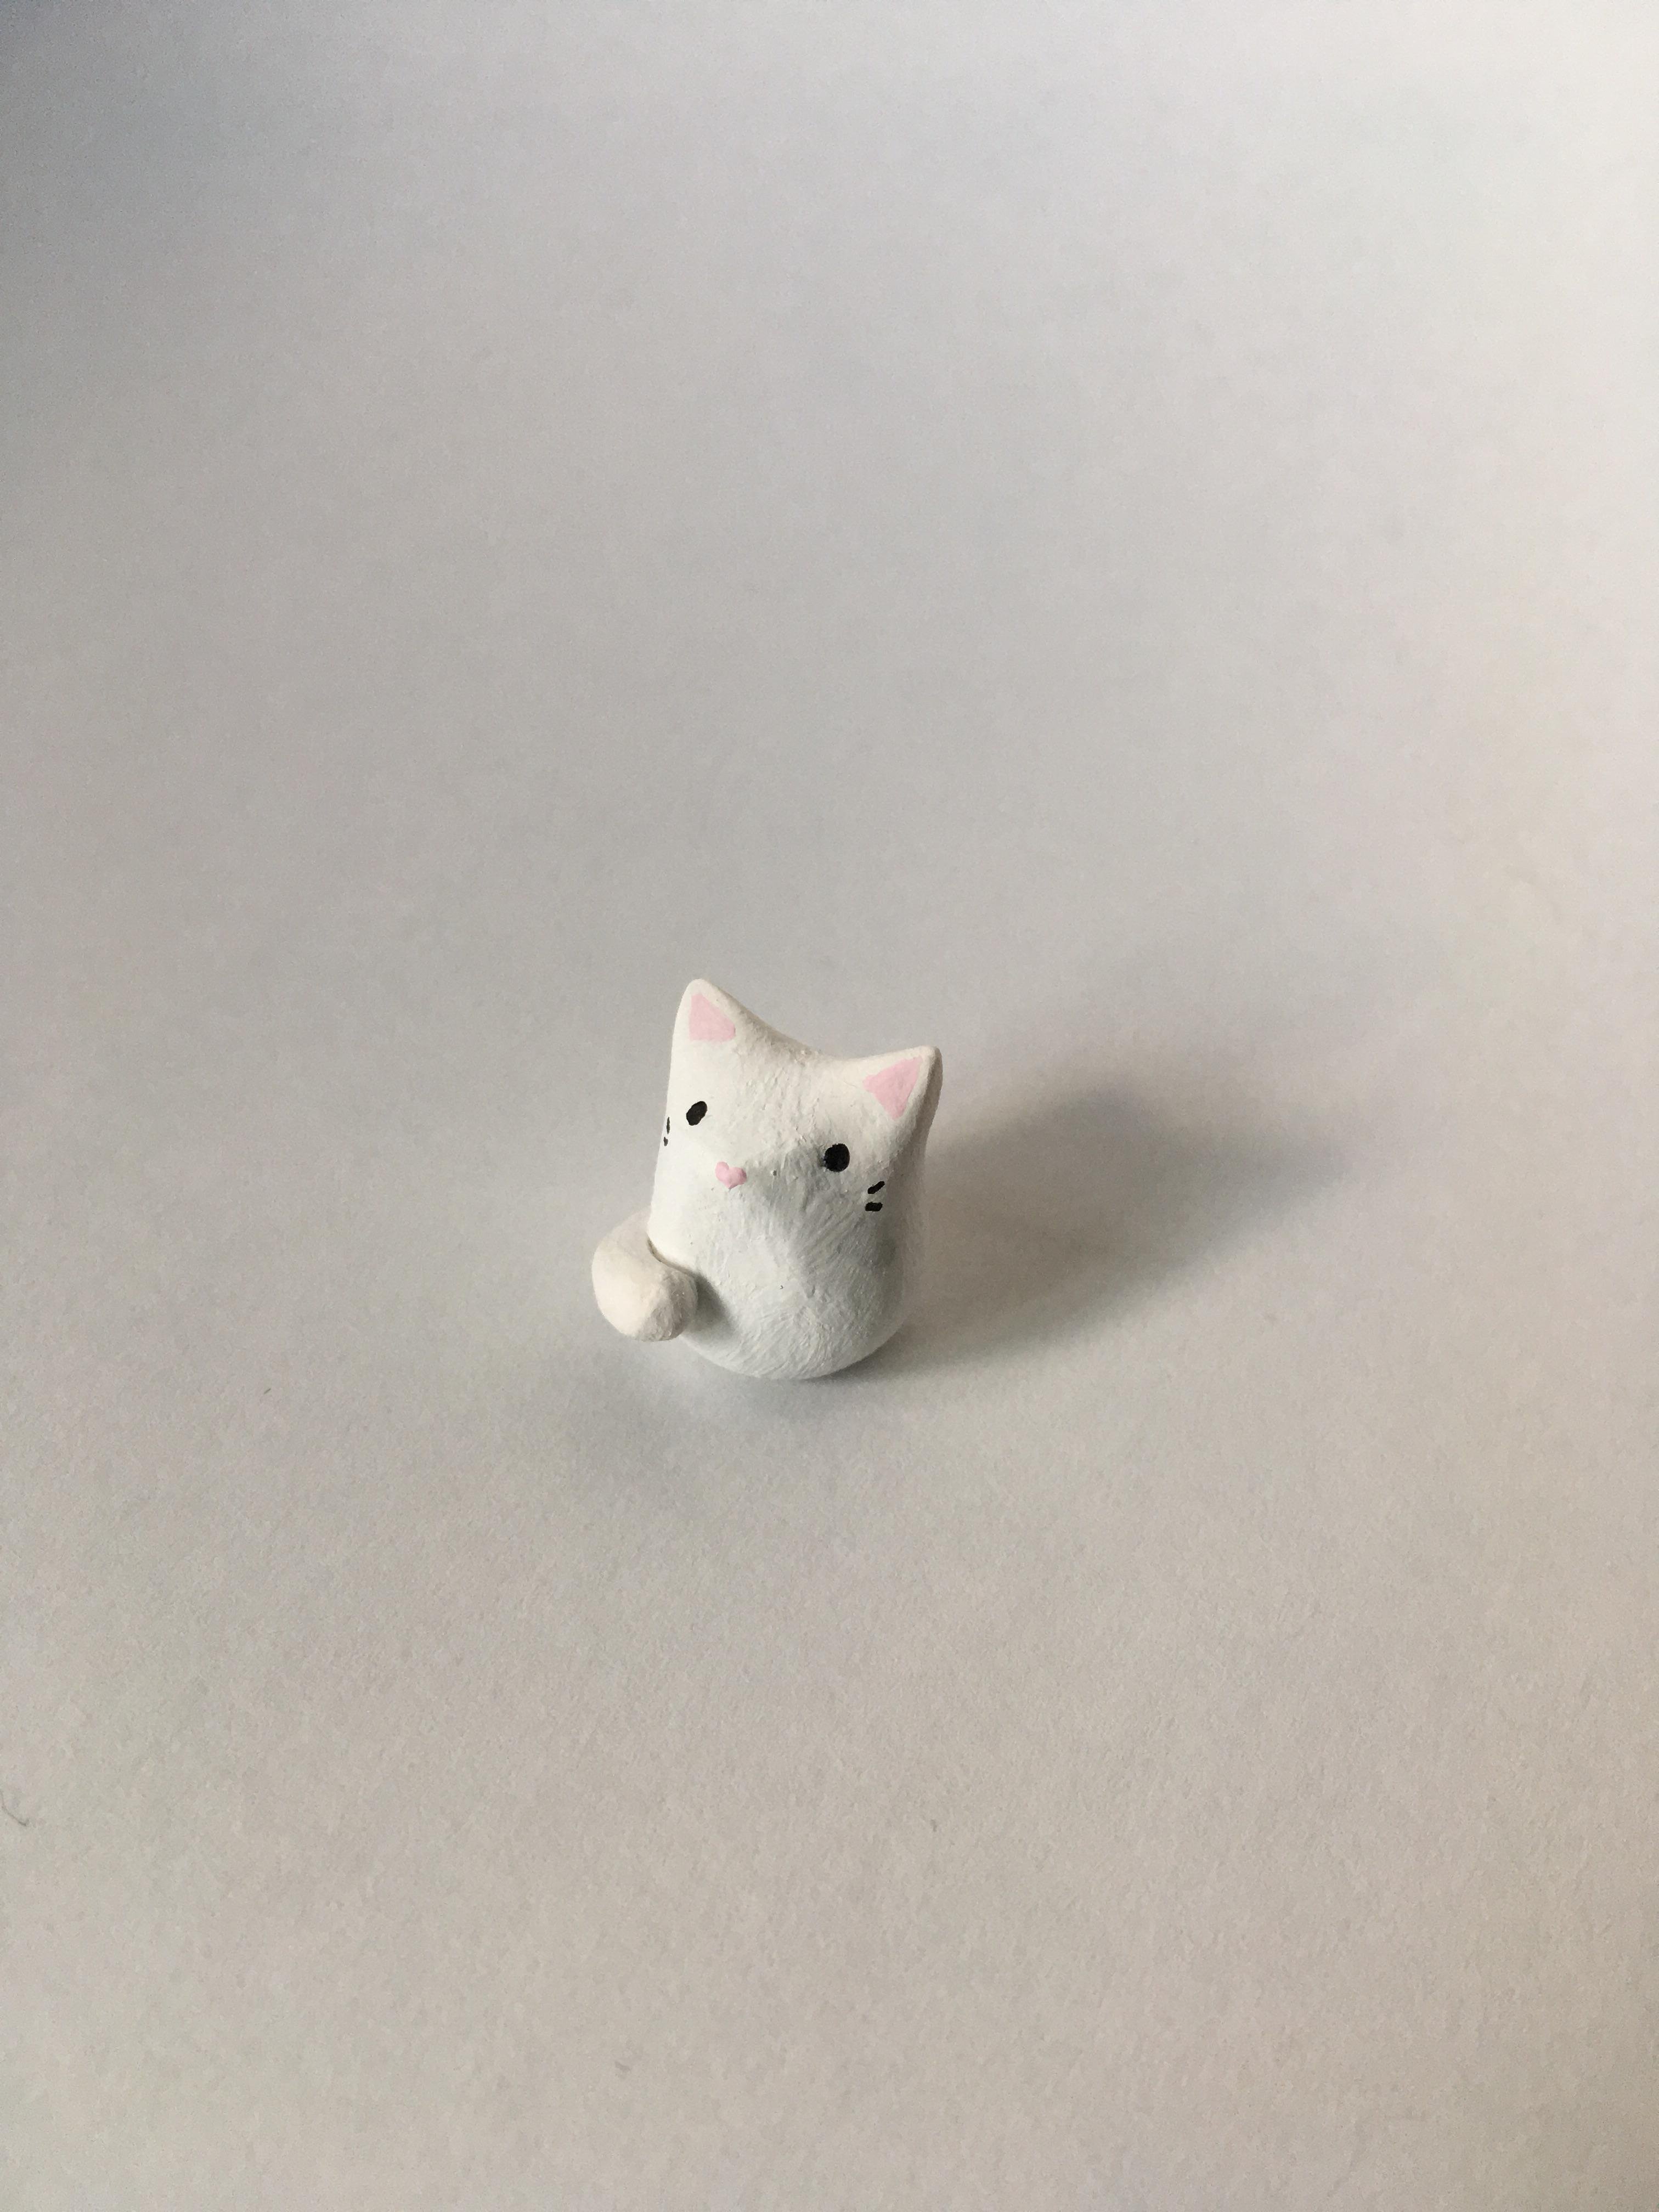 I make tiny clay kitties to keep me company during these daddyless times 